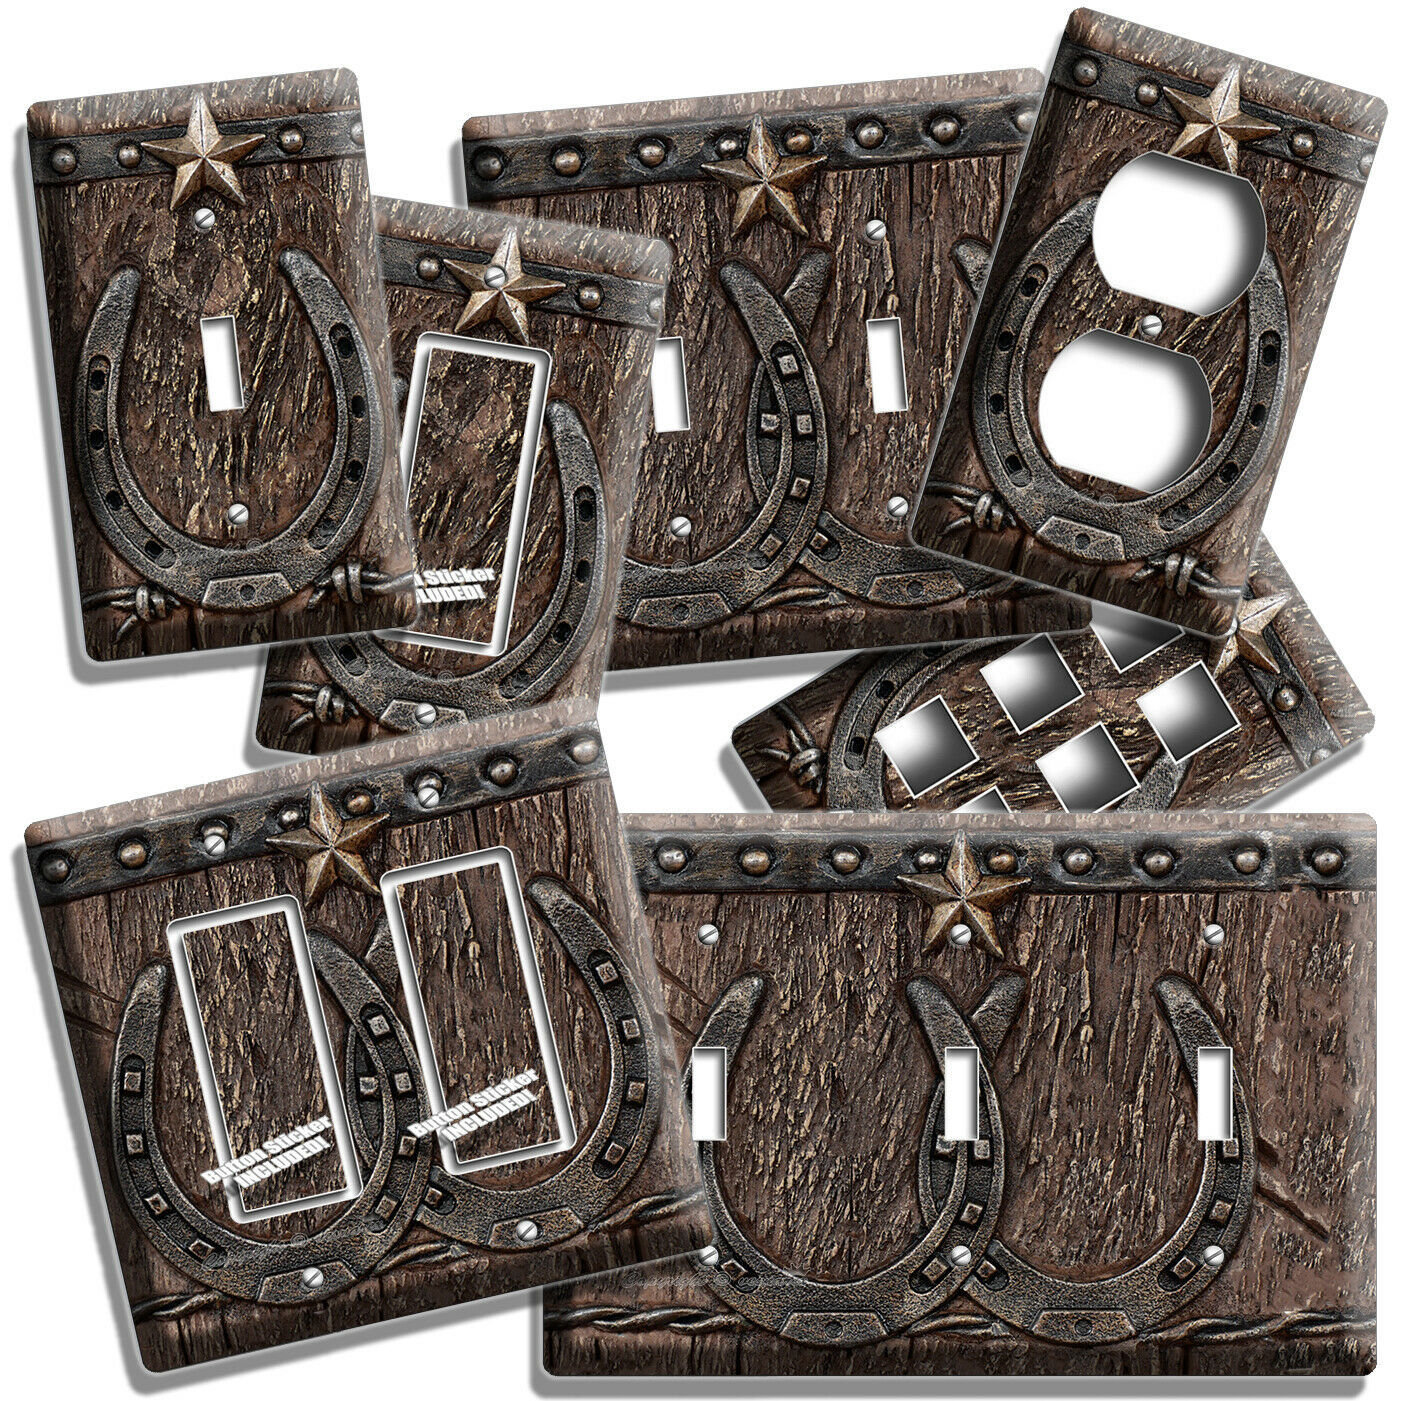 RUSTIC WESTERN COWBOY LONE STAR LUCKY HORSESHOE LIGHT SWITCH OUTLET WALL DECOR - $10.79 - $26.99